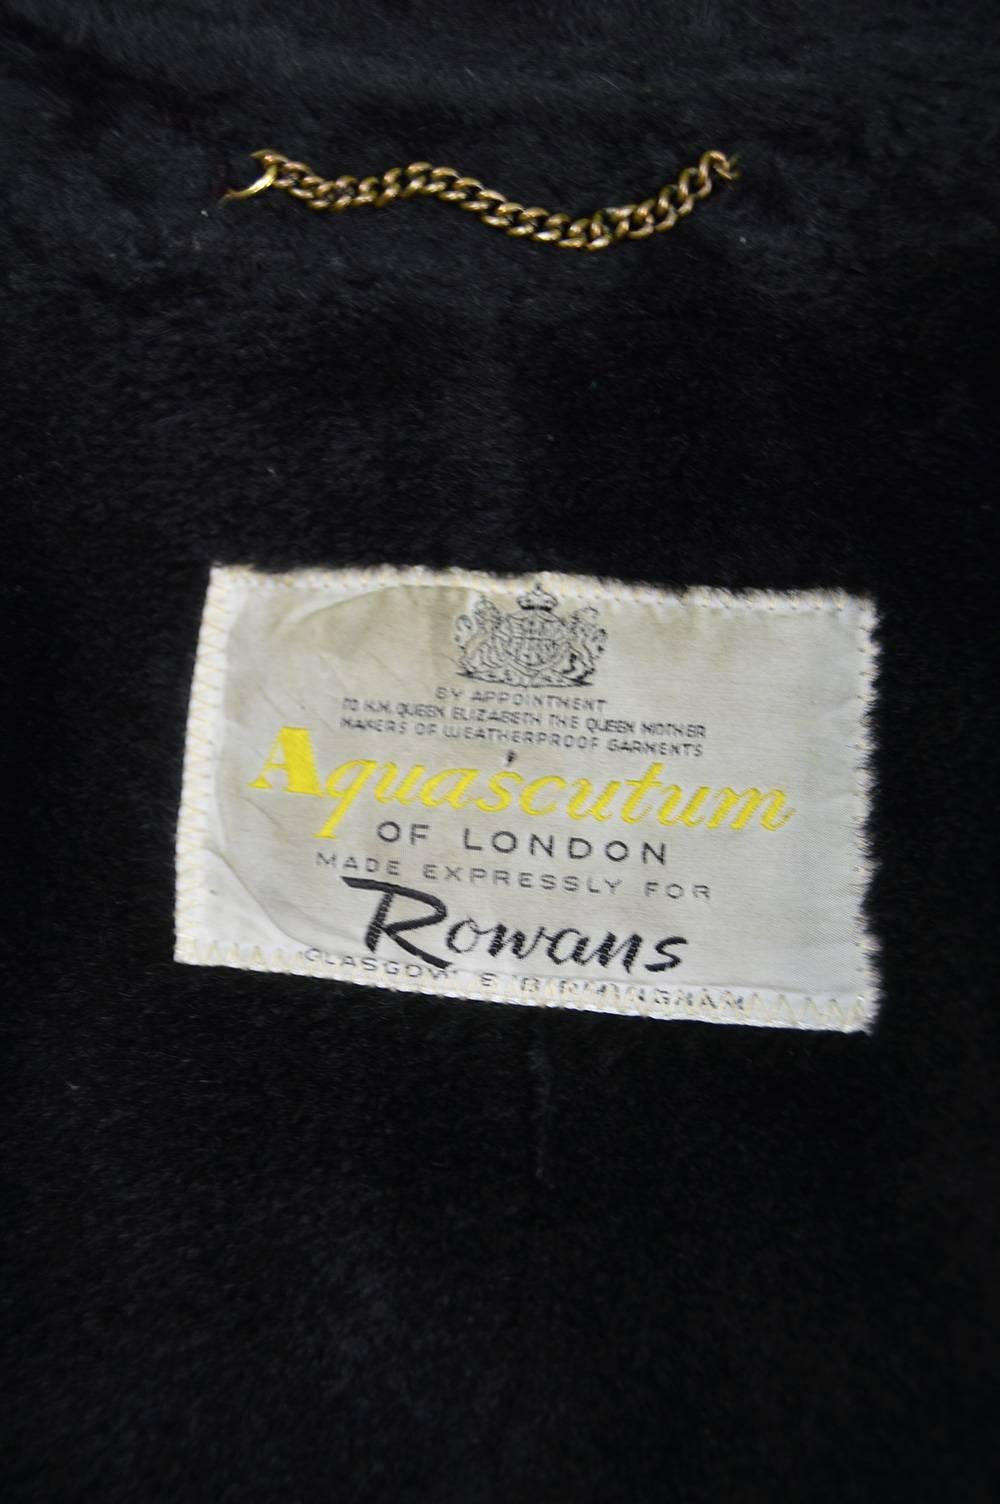 Aquascutum Men's Wool Herringbone Overcoat with Faux Fur Collar, 1960s In Excellent Condition For Sale In Doncaster, South Yorkshire